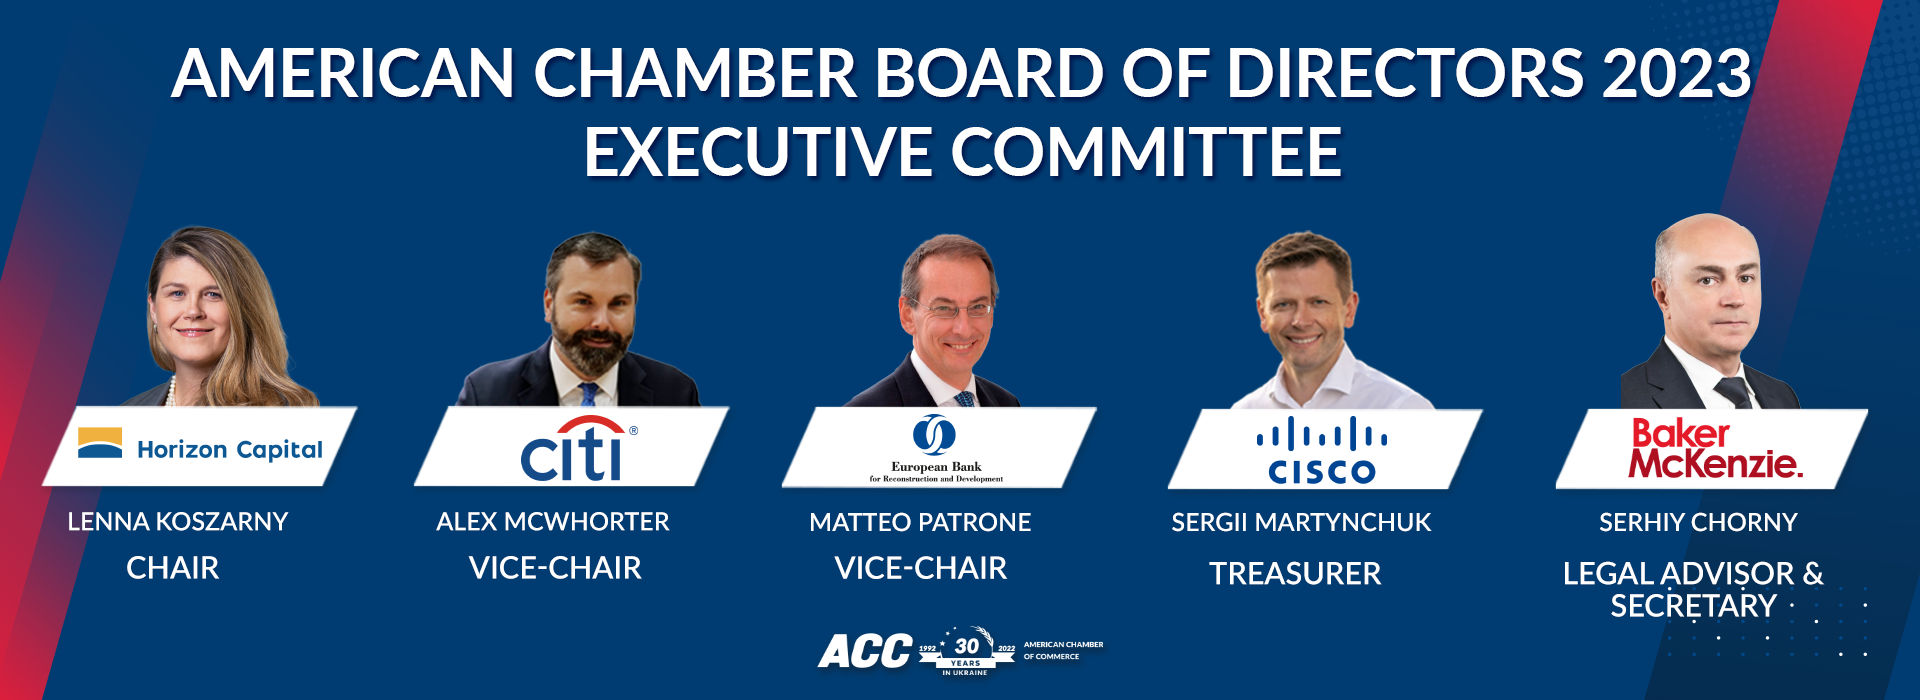 Executive Committee of the 2023 American Chamber Board of Directors